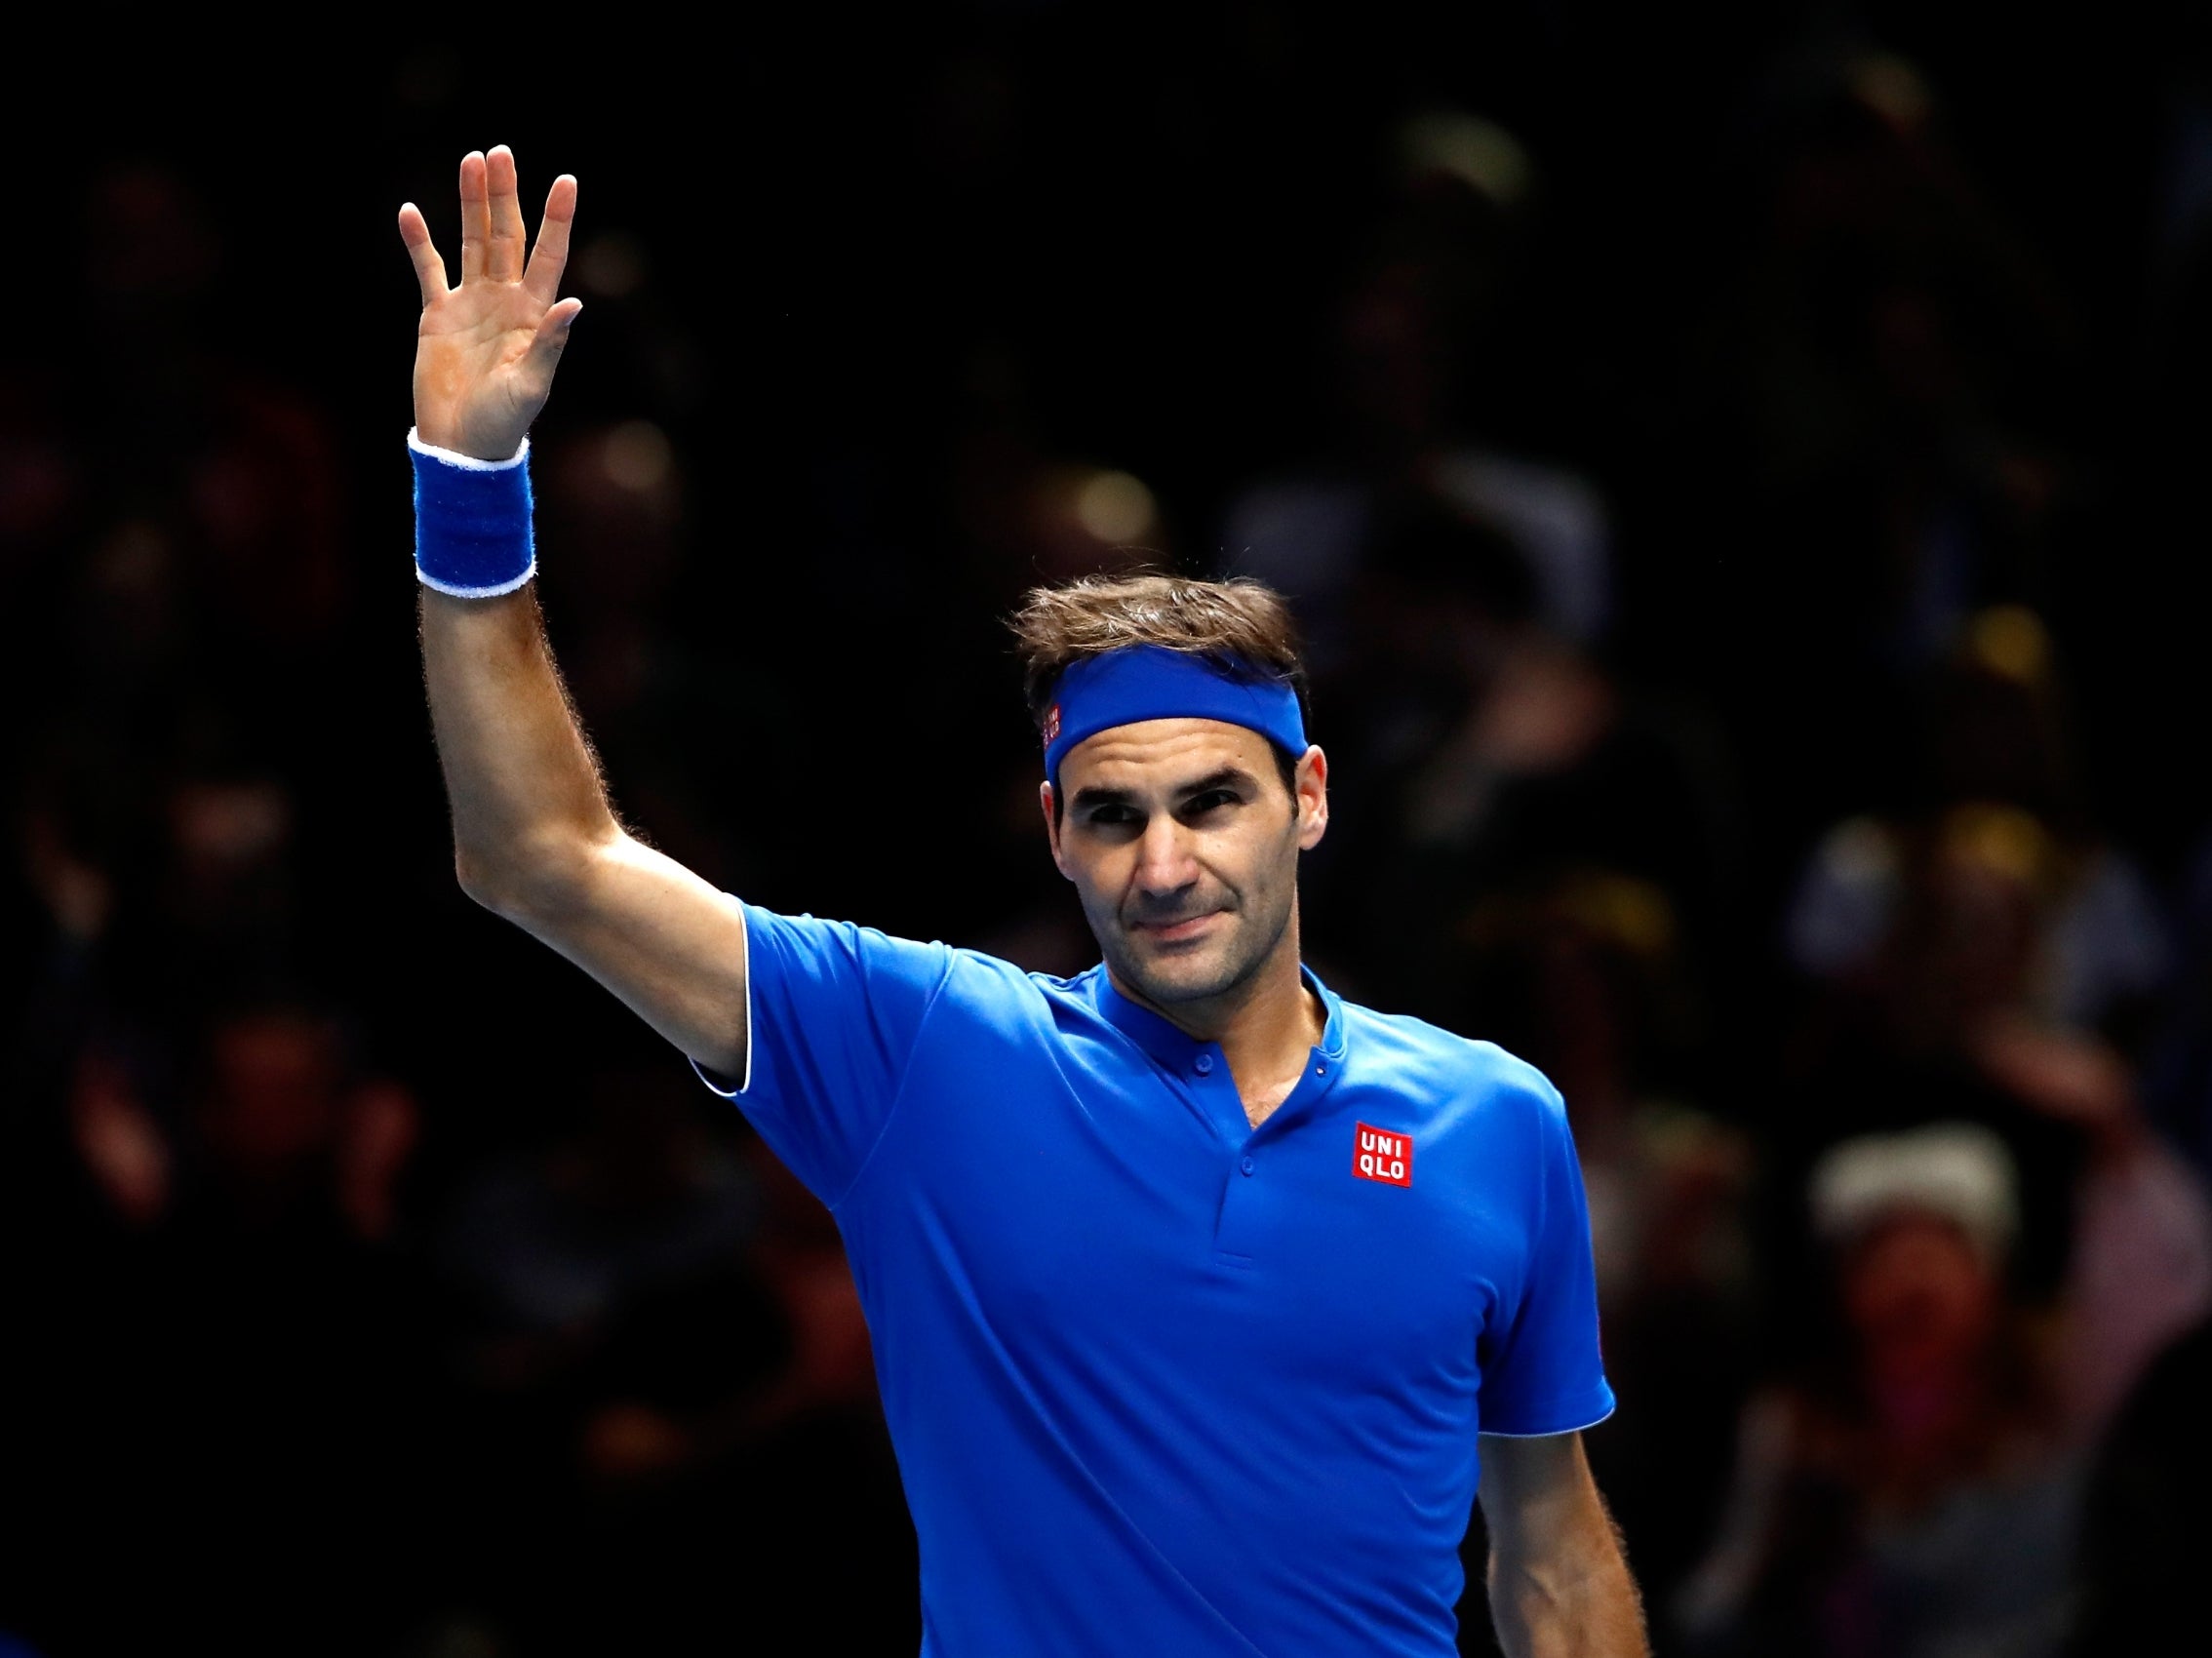 Roger Federer got back to winning ways by defeating Dominic Thiem at the ATP Finals